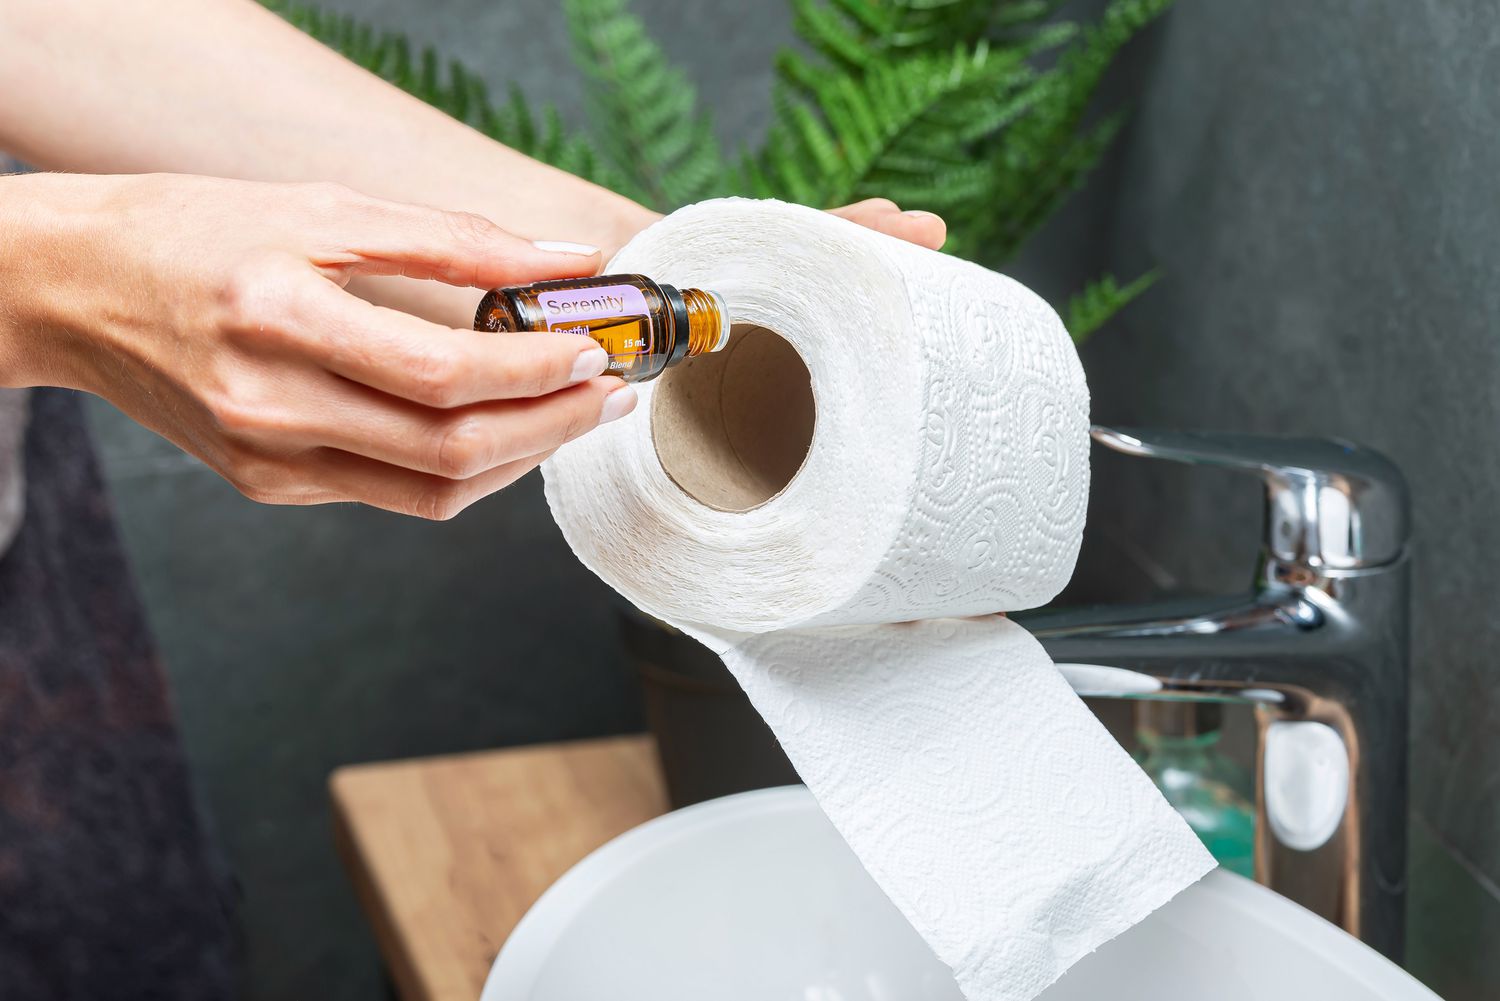 adding essential oil to the inside of a toilet paper roll